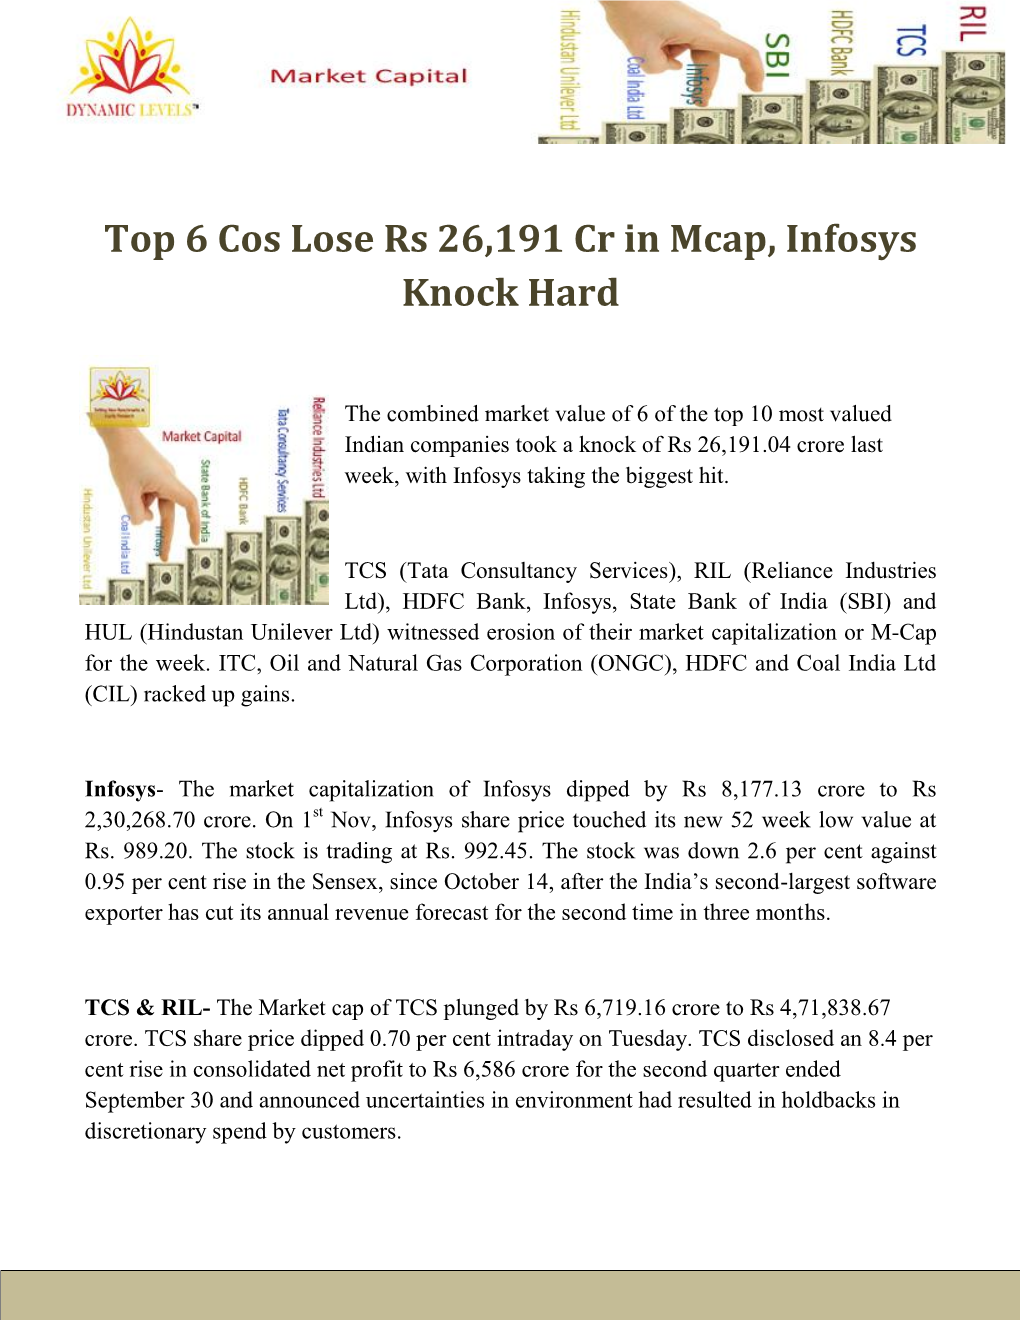 Top 6 Cos Lose Rs 26,191 Cr in Mcap, Infosys Knock Hard